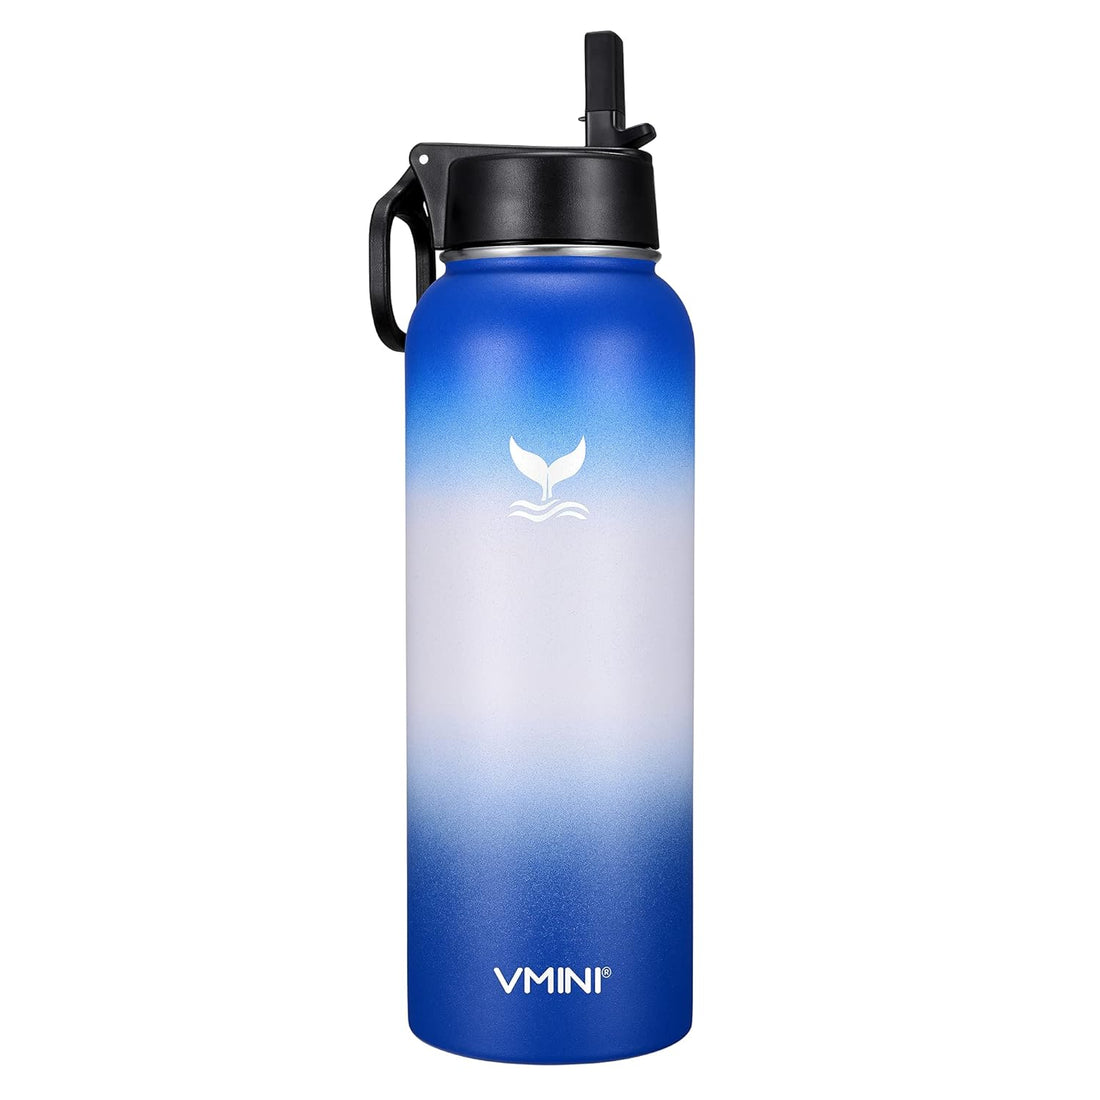 Vmini Water Bottle with Straw, Wide Rotating Handle Straw Lid, Wide Mouth Vacuum Insulated Stainless Steel Water Bottle, Gradient Blue+White+Blue, 40 oz